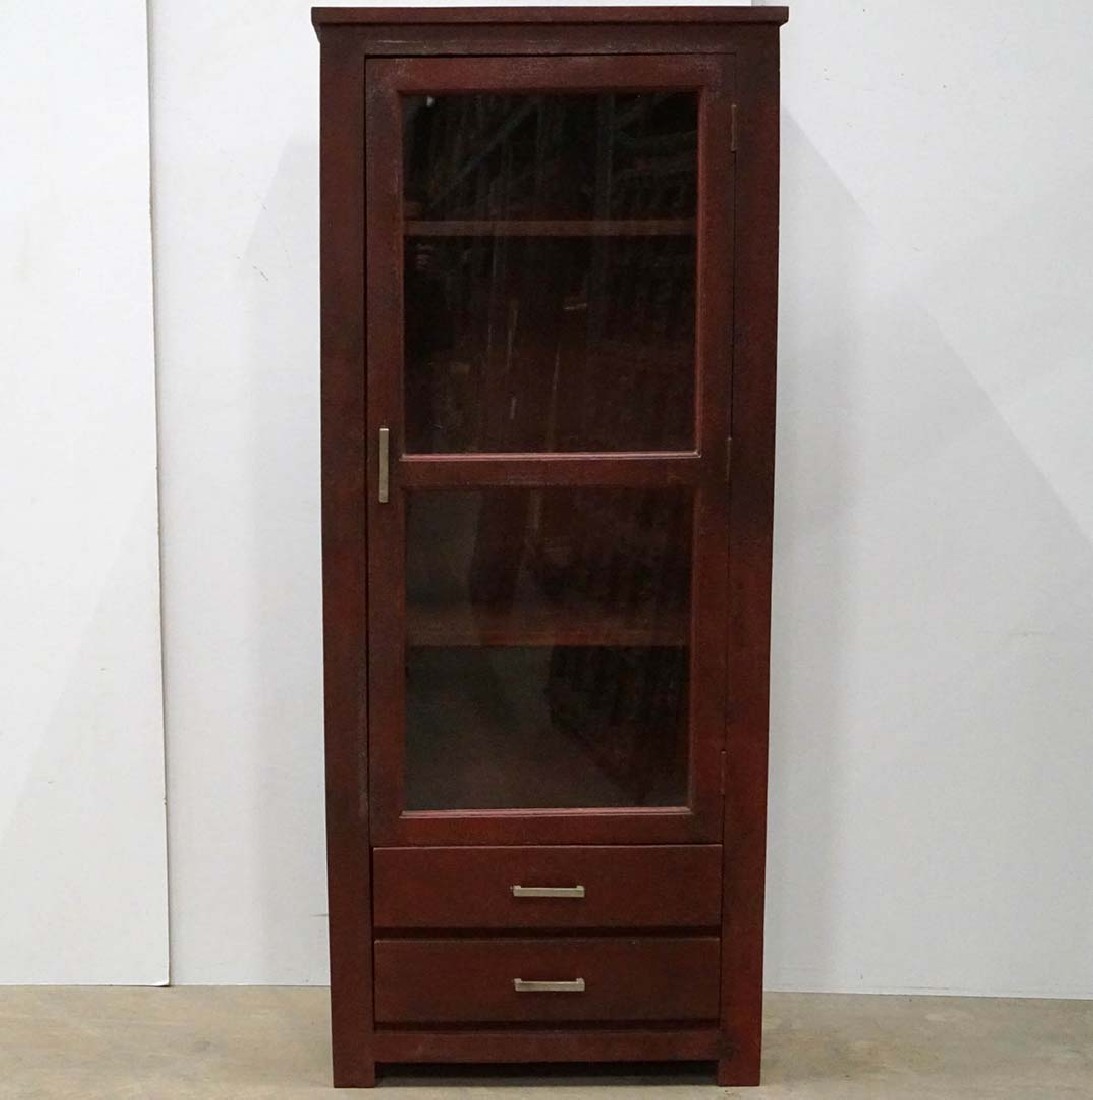 Trademark Old cabinet with 2 drawers3dhaus.gr